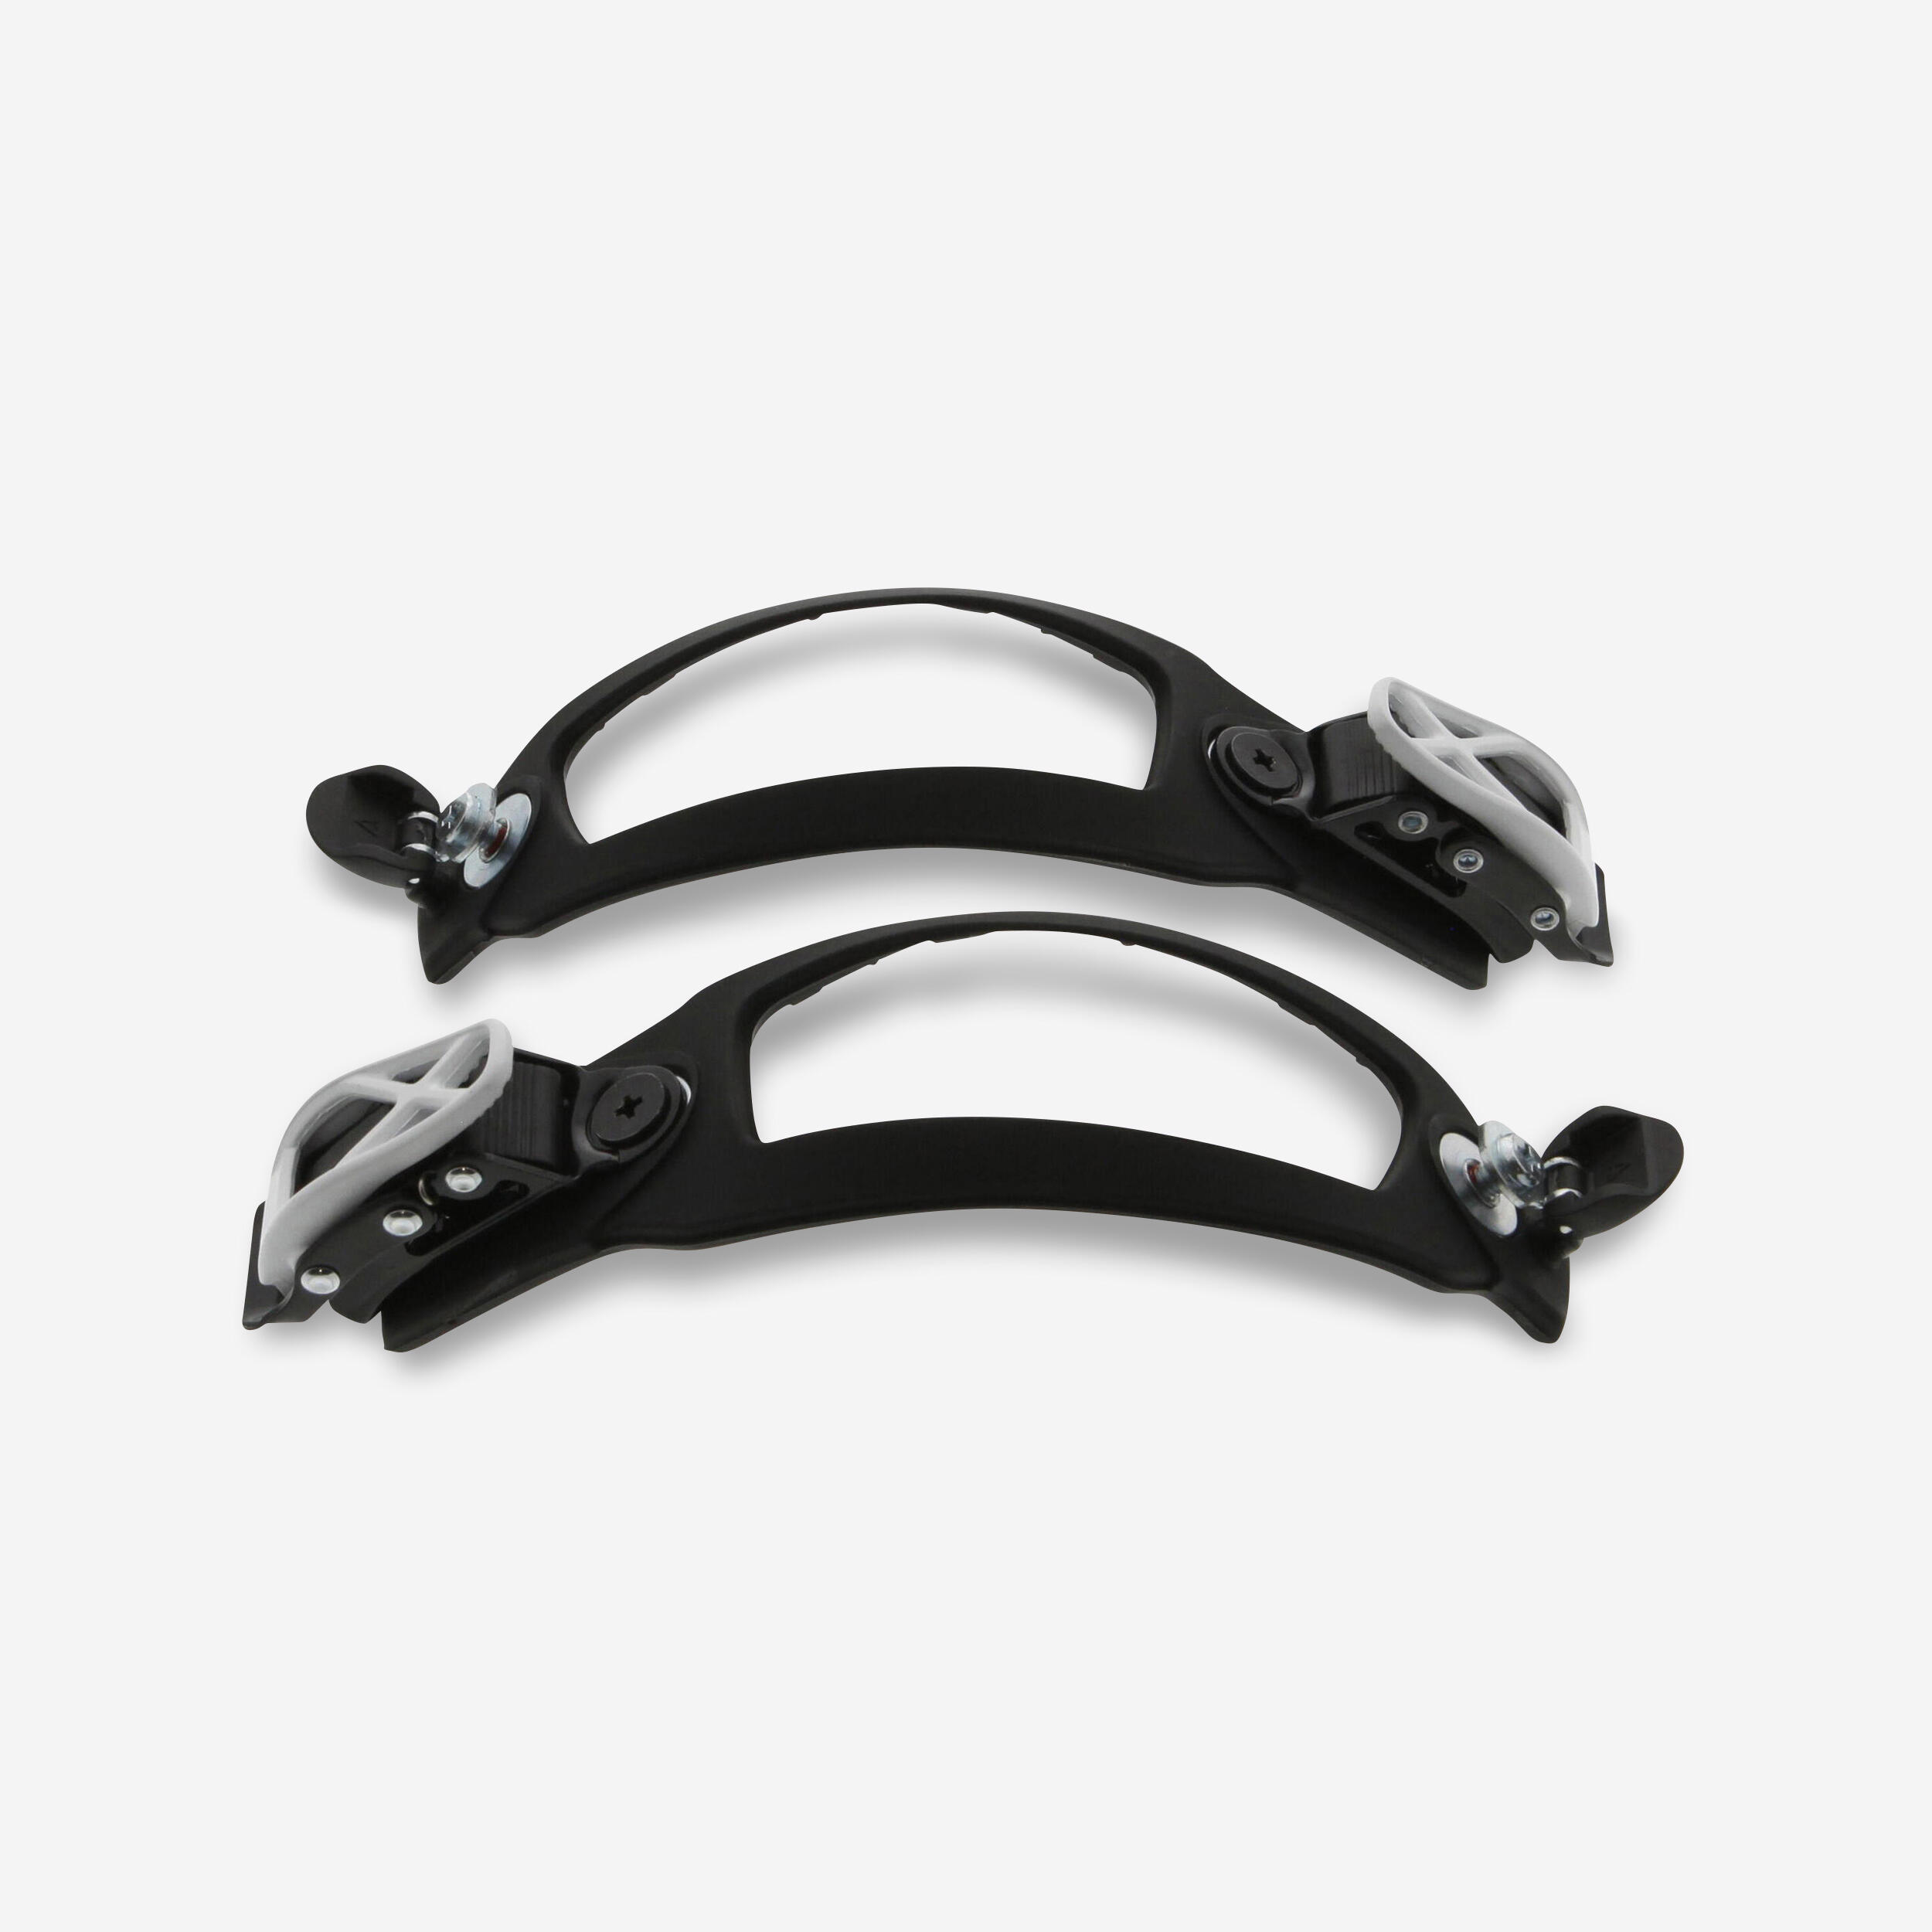 2 toe straps for 1 pair of SNB 500 snowboard bindings in size M (3/7) 1/2